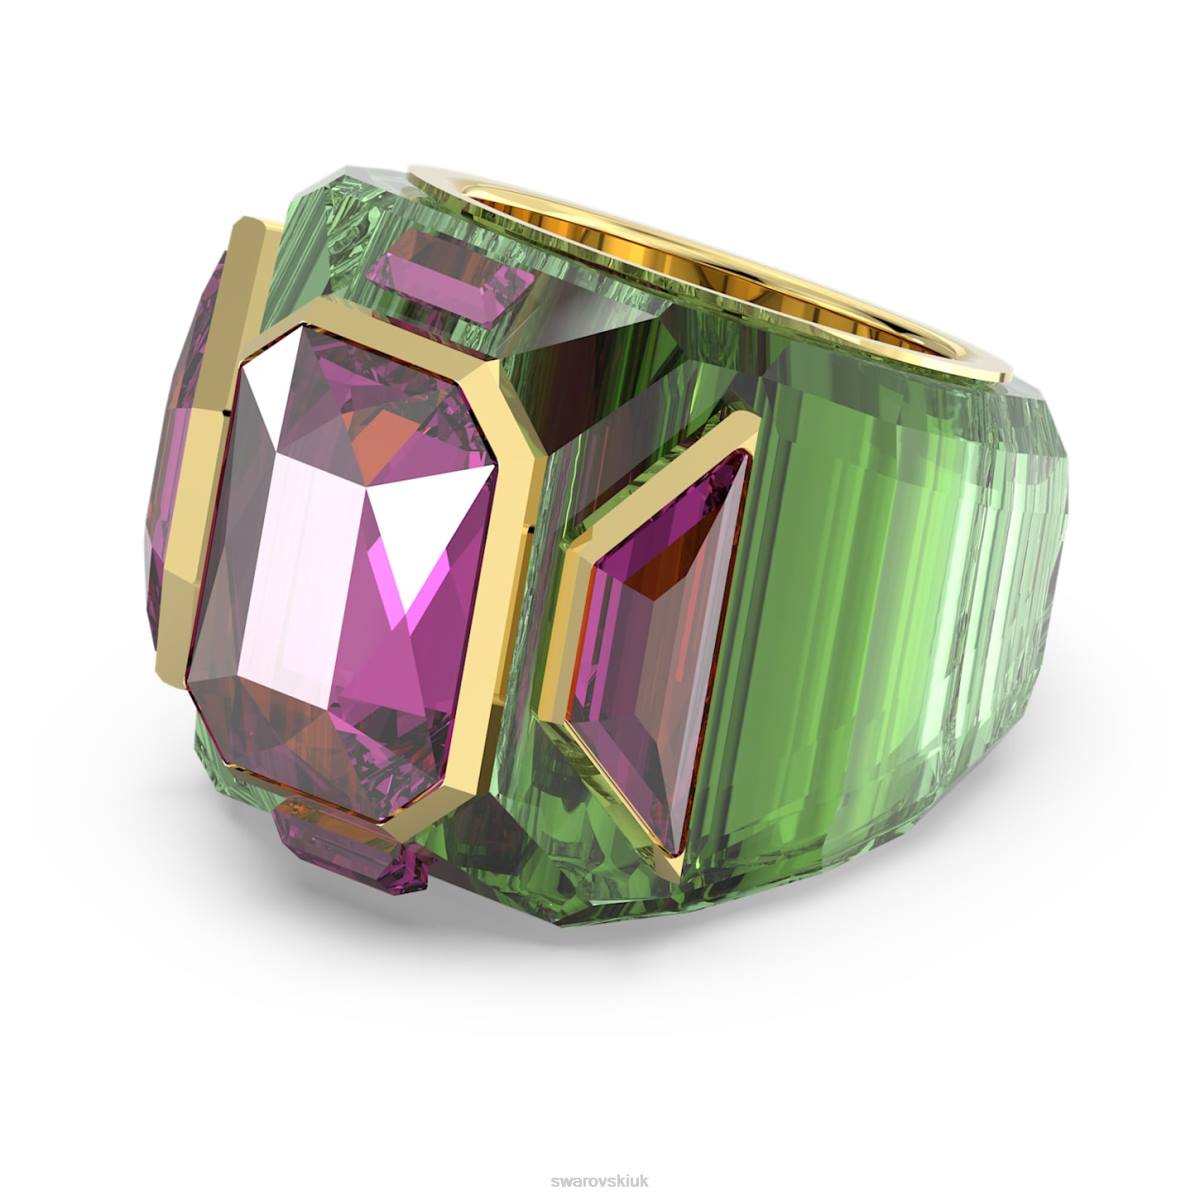 Jewelry Swarovski Chroma cocktail ring Multicolored, Gold-tone plated 48JX1036